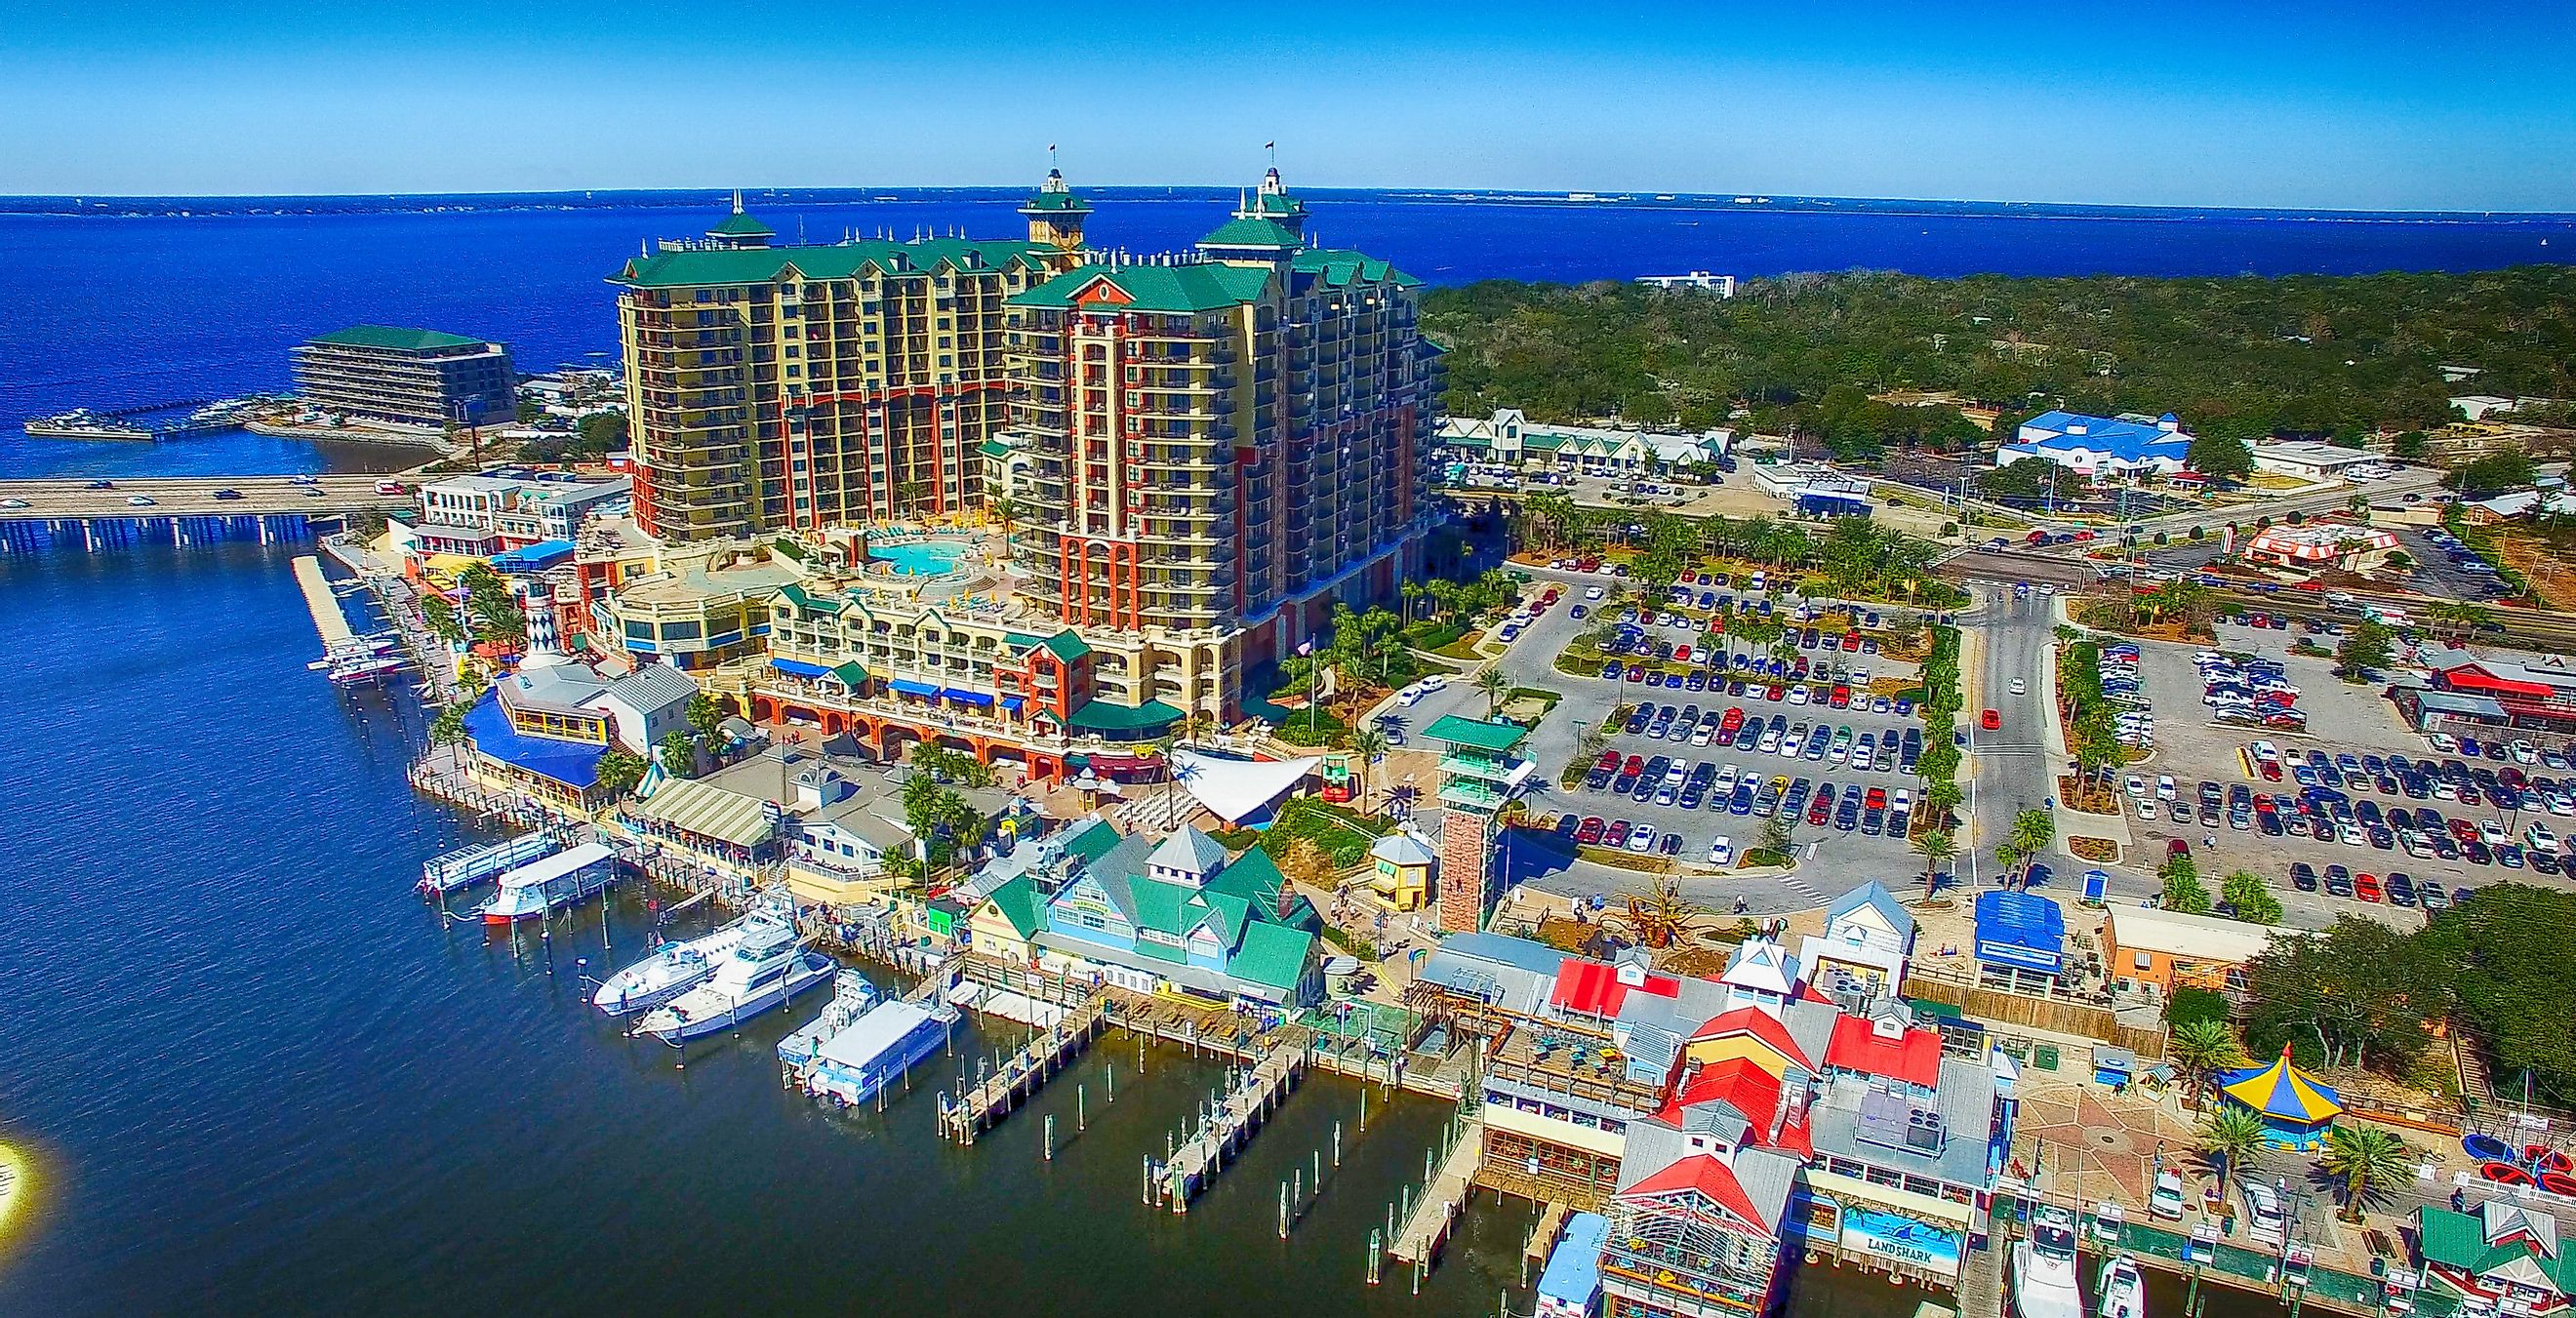 Aerial view of the stunning skyline of Destin, Florida.